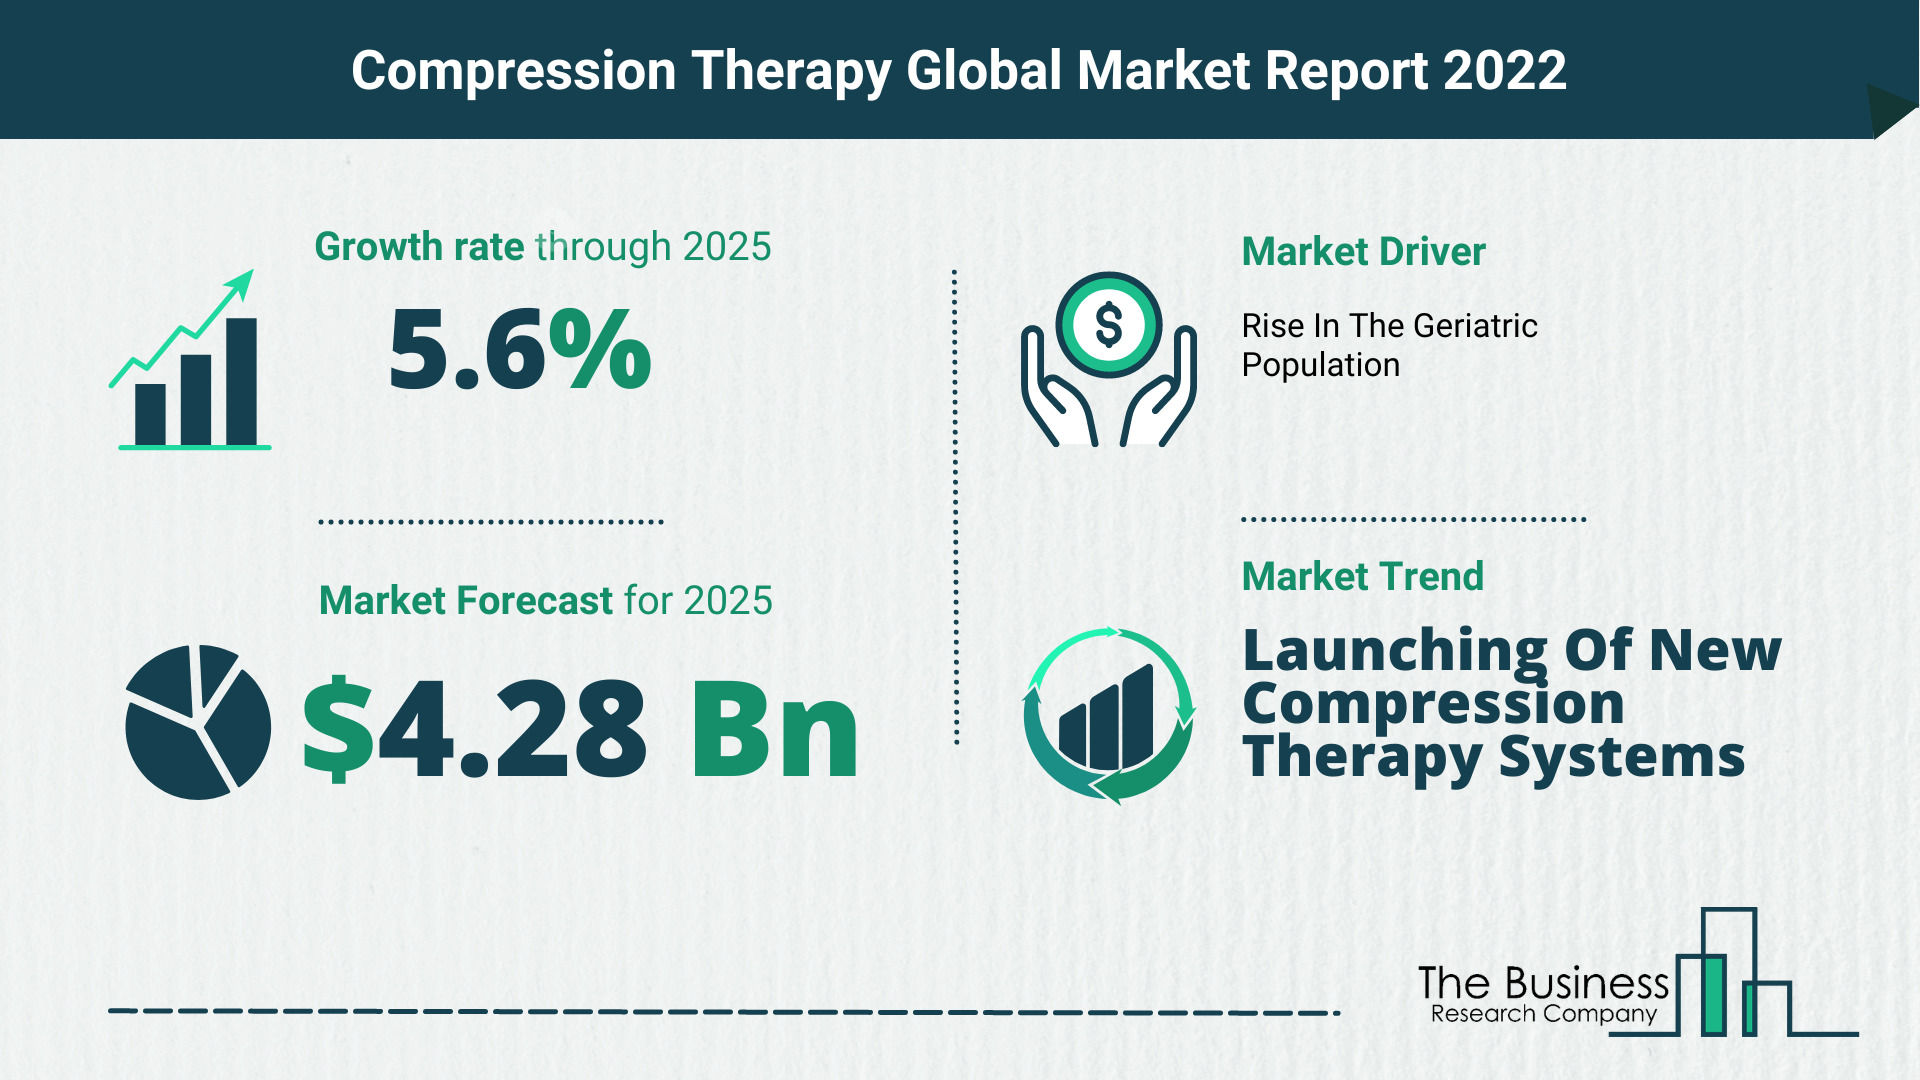 What Is The Compression Therapy Market Overview In 2022?